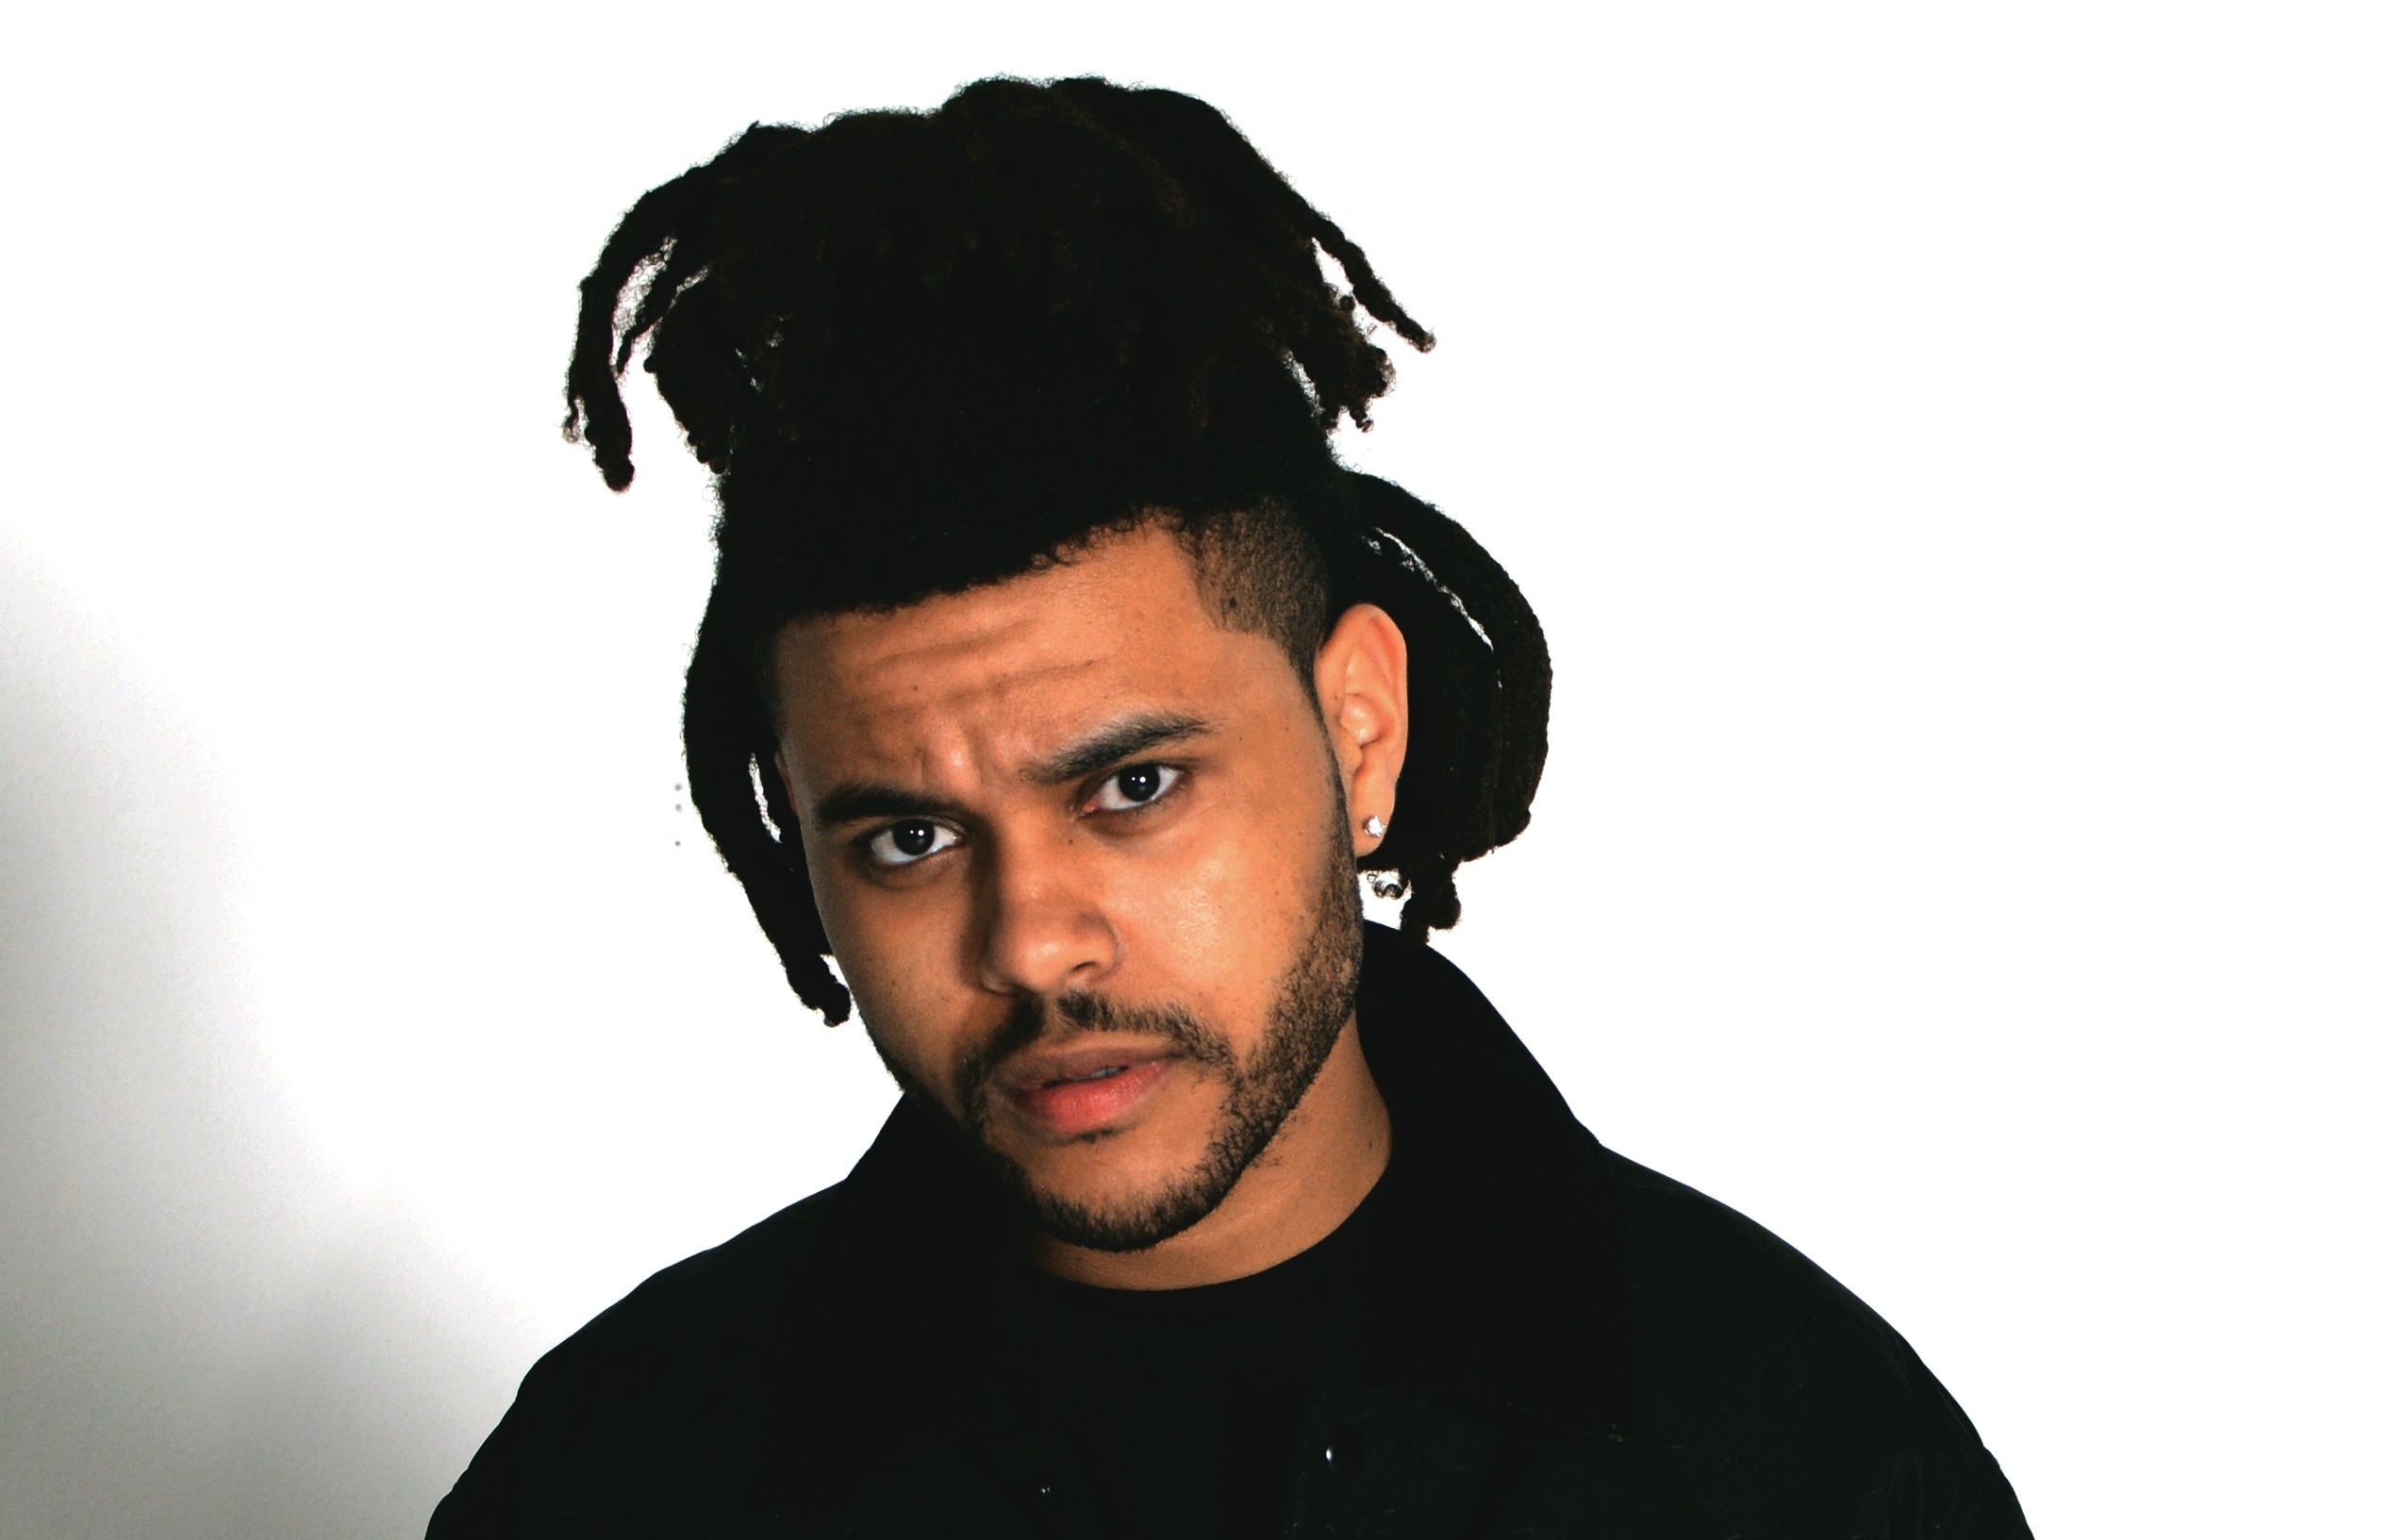 The Weeknd Backgrounds, Compatible - PC, Mobile, Gadgets| 2550x1633 px